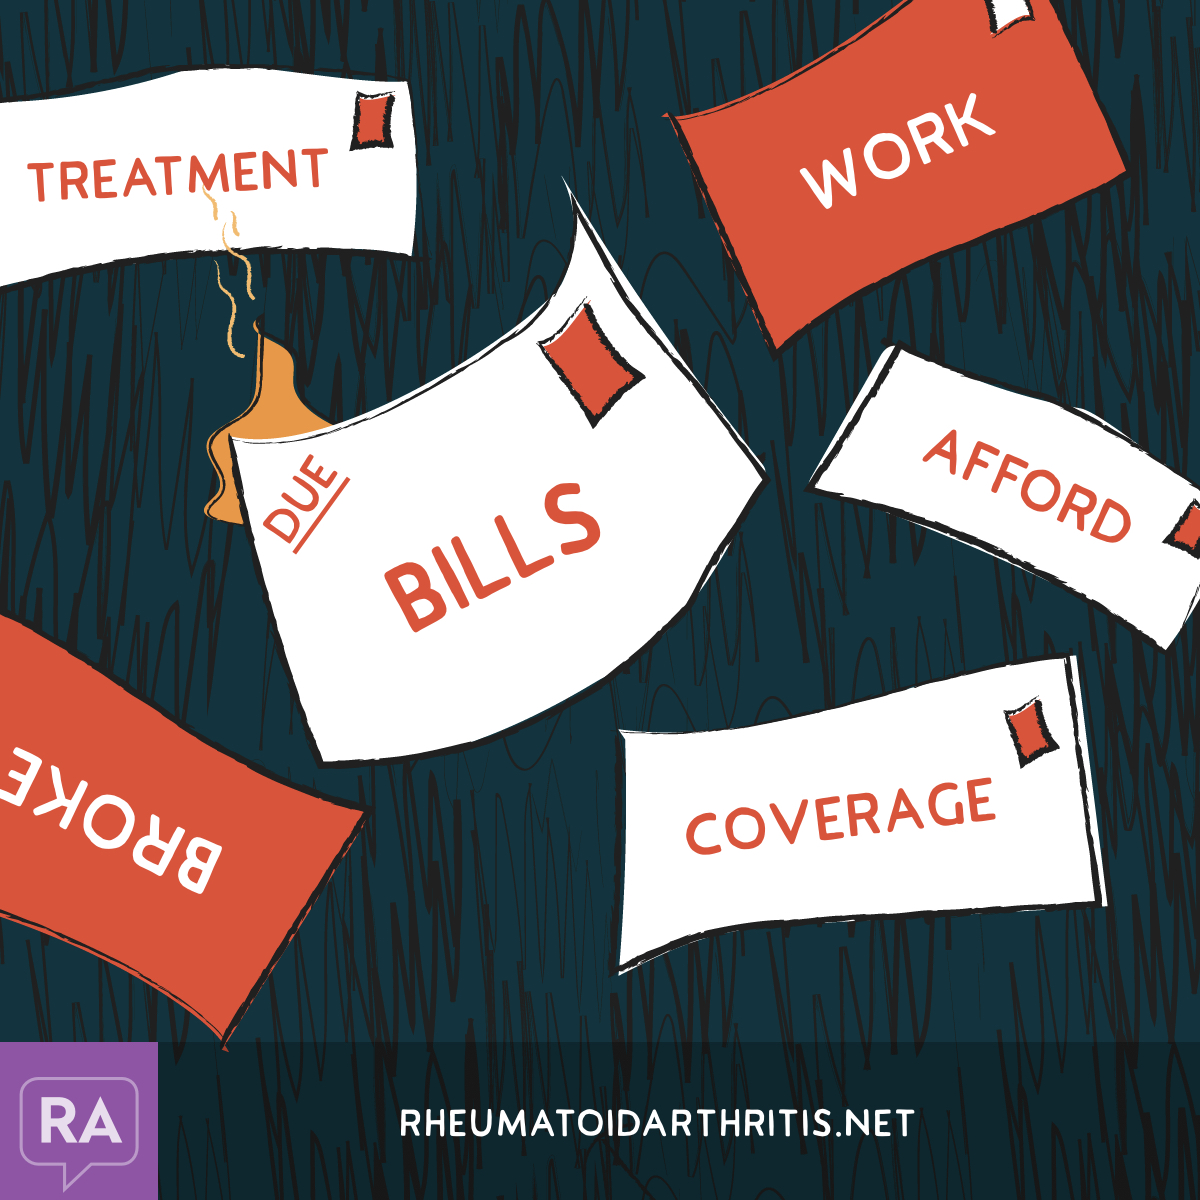 Bills with words like treatment, work, afford, coverage, broke pile up and one begins to catch fire.